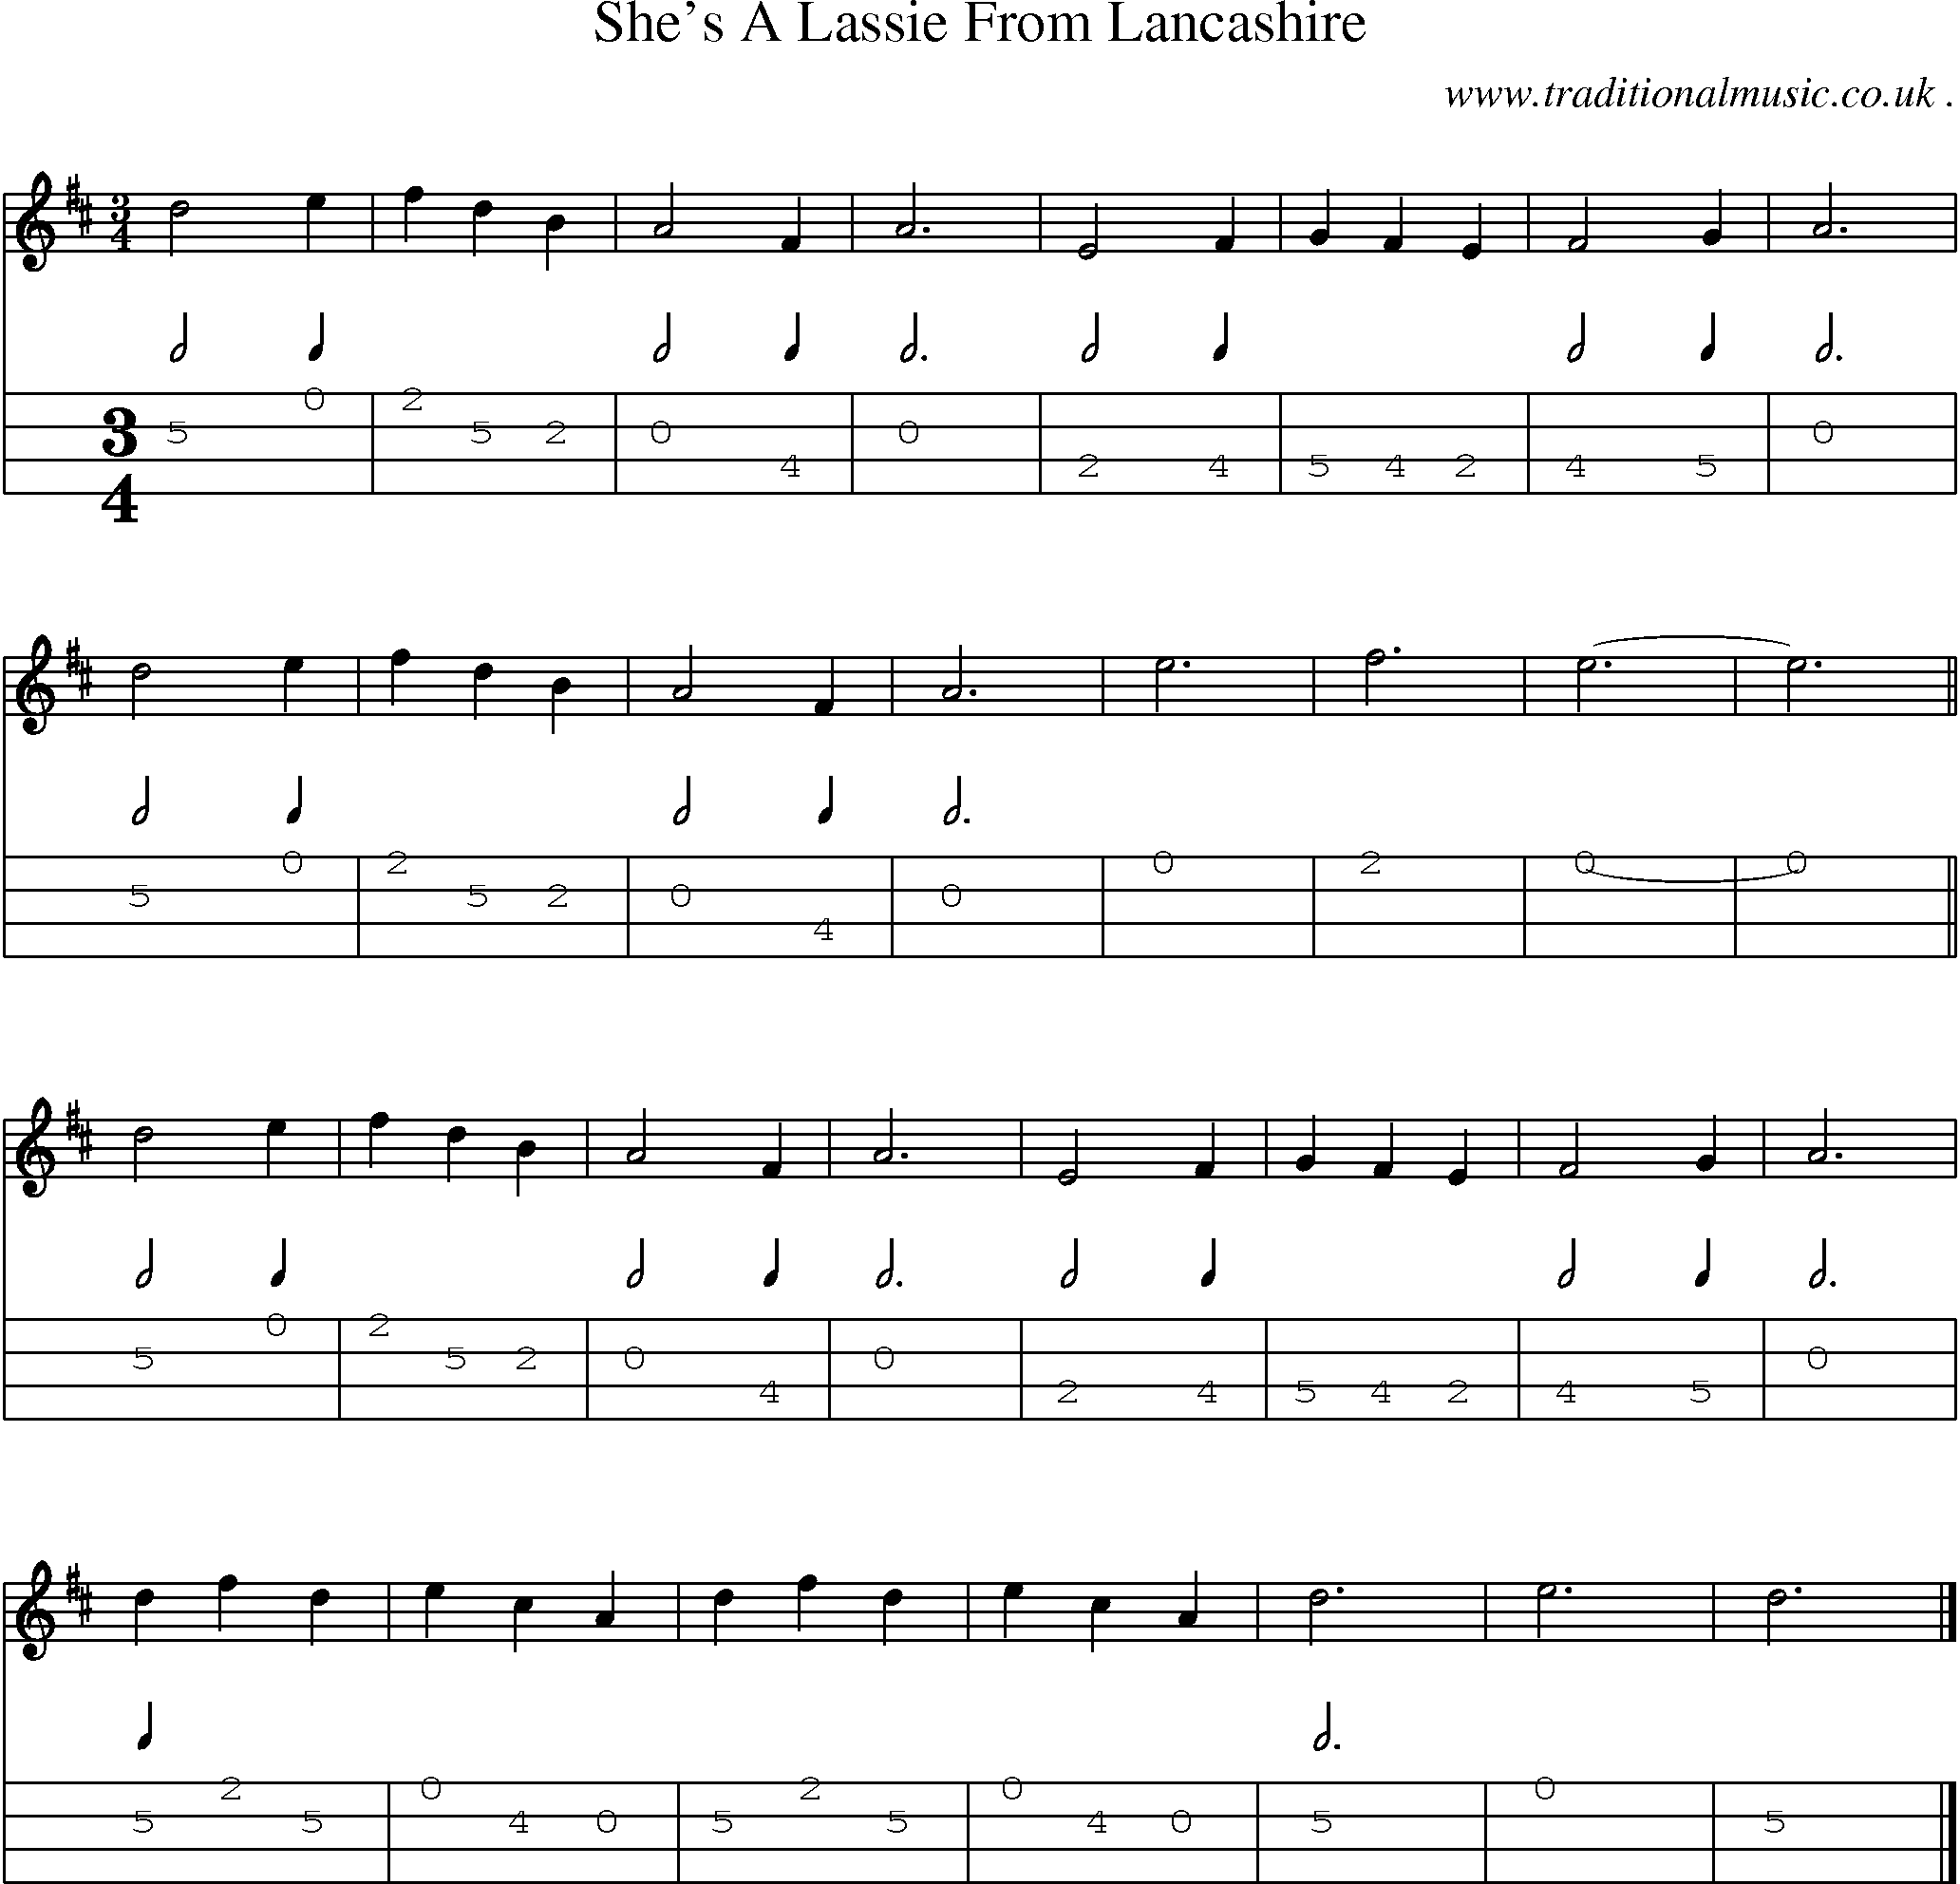 Sheet-music  score, Chords and Mandolin Tabs for Shes A Lassie From Lancashire